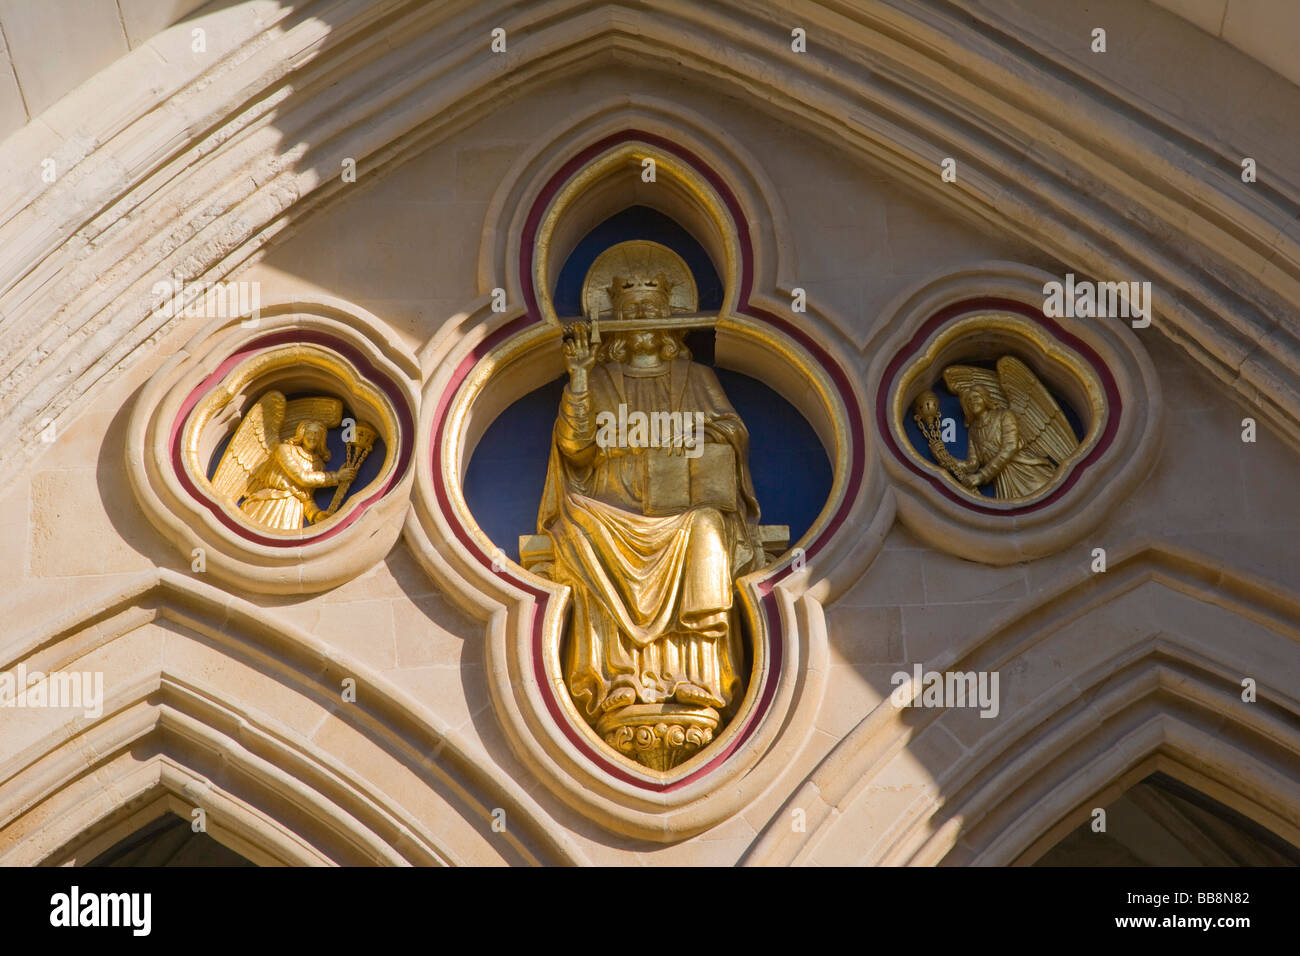 Details above the entrance door, Chichester Cathedral, Sussex, England, United Kingdom Stock Photo